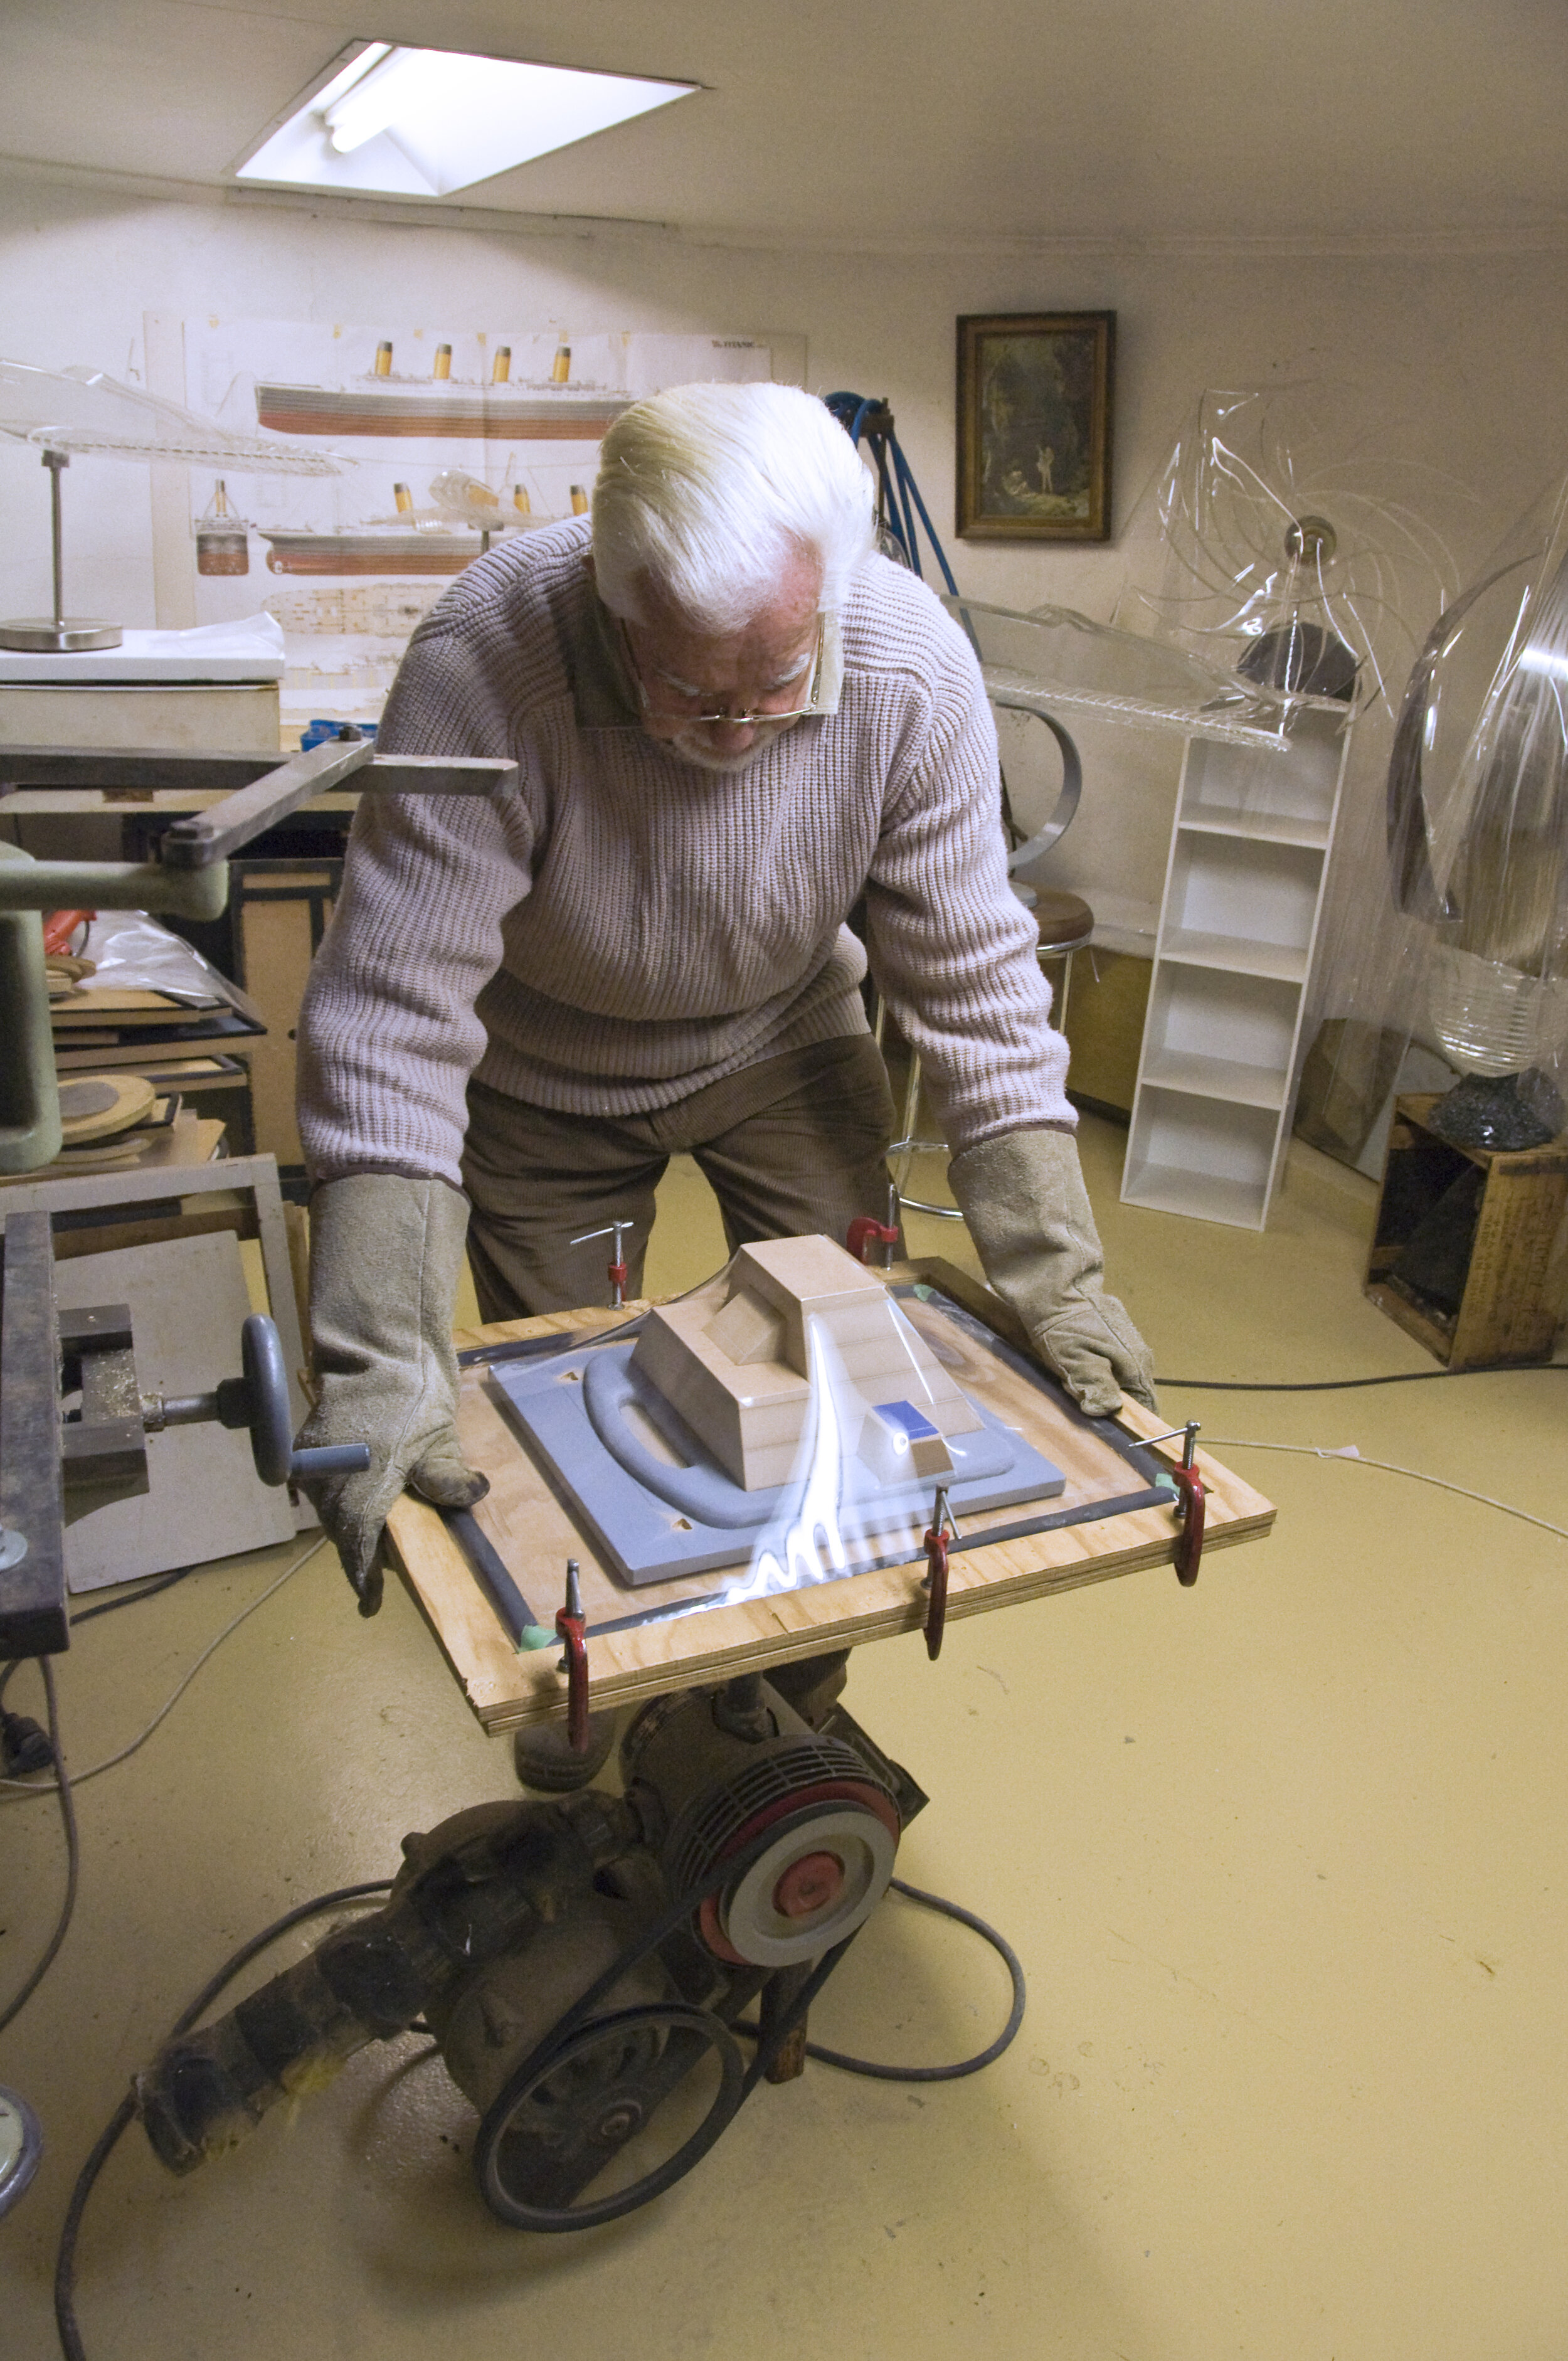 Plastic is sucked over the form by industrial vacuum pump. Note gloves for retrieving frame from oven